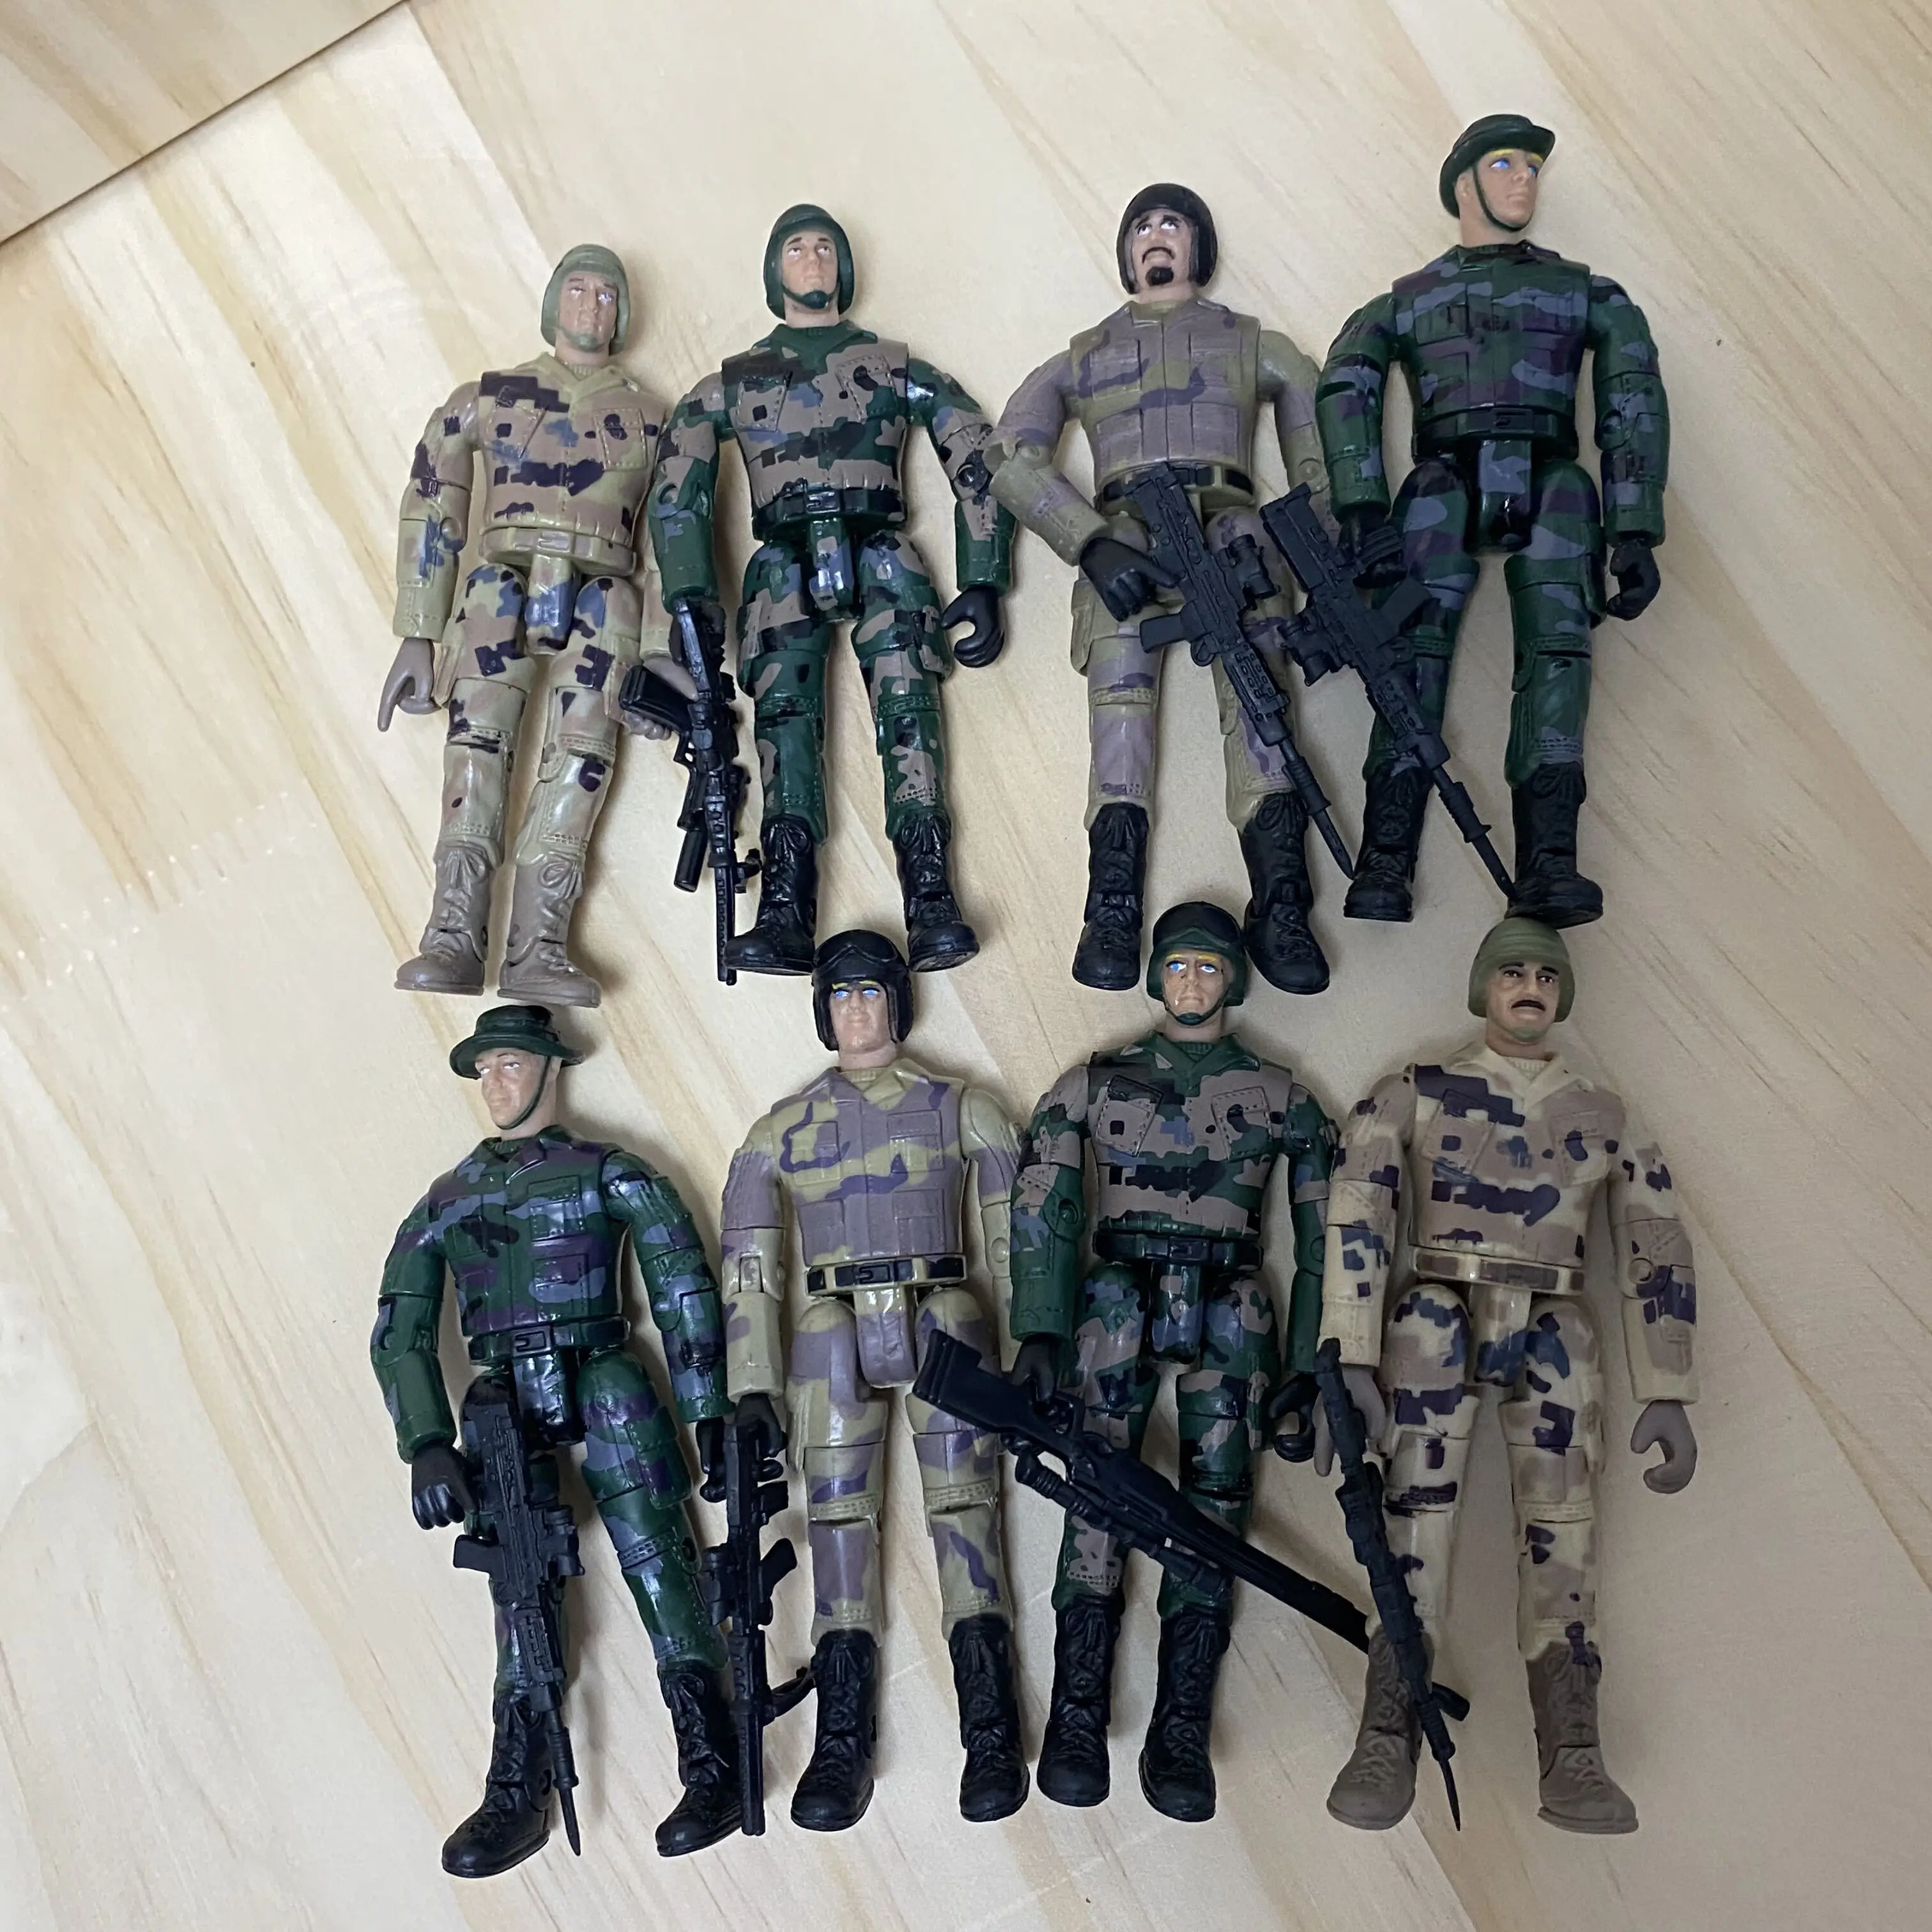 

Random 4pcs World Peacekeepers Camo Army Military Elite Soldier 3.75 INCH Action Figure toys